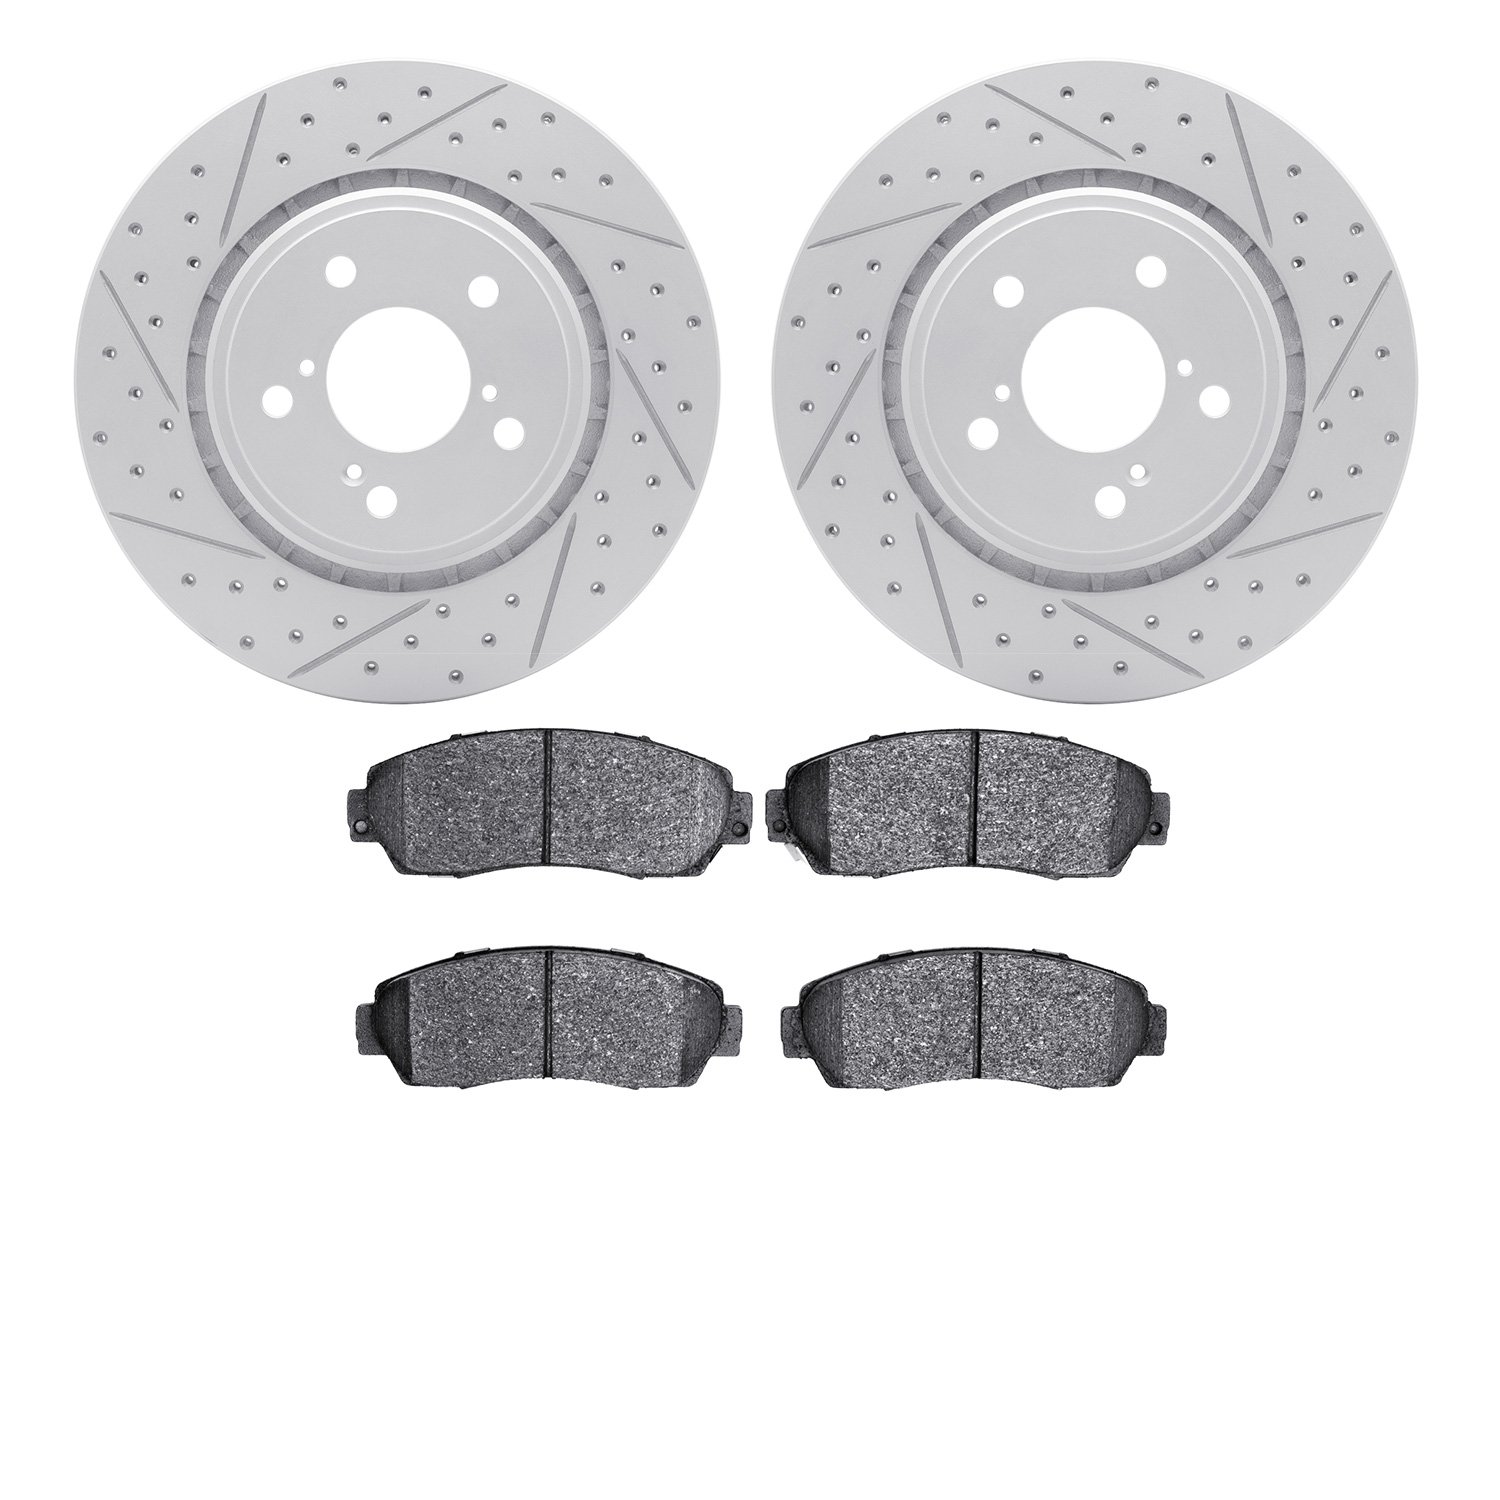 2502-59080 Geoperformance Drilled/Slotted Rotors w/5000 Advanced Brake Pads Kit, Fits Select Acura/Honda, Position: Front